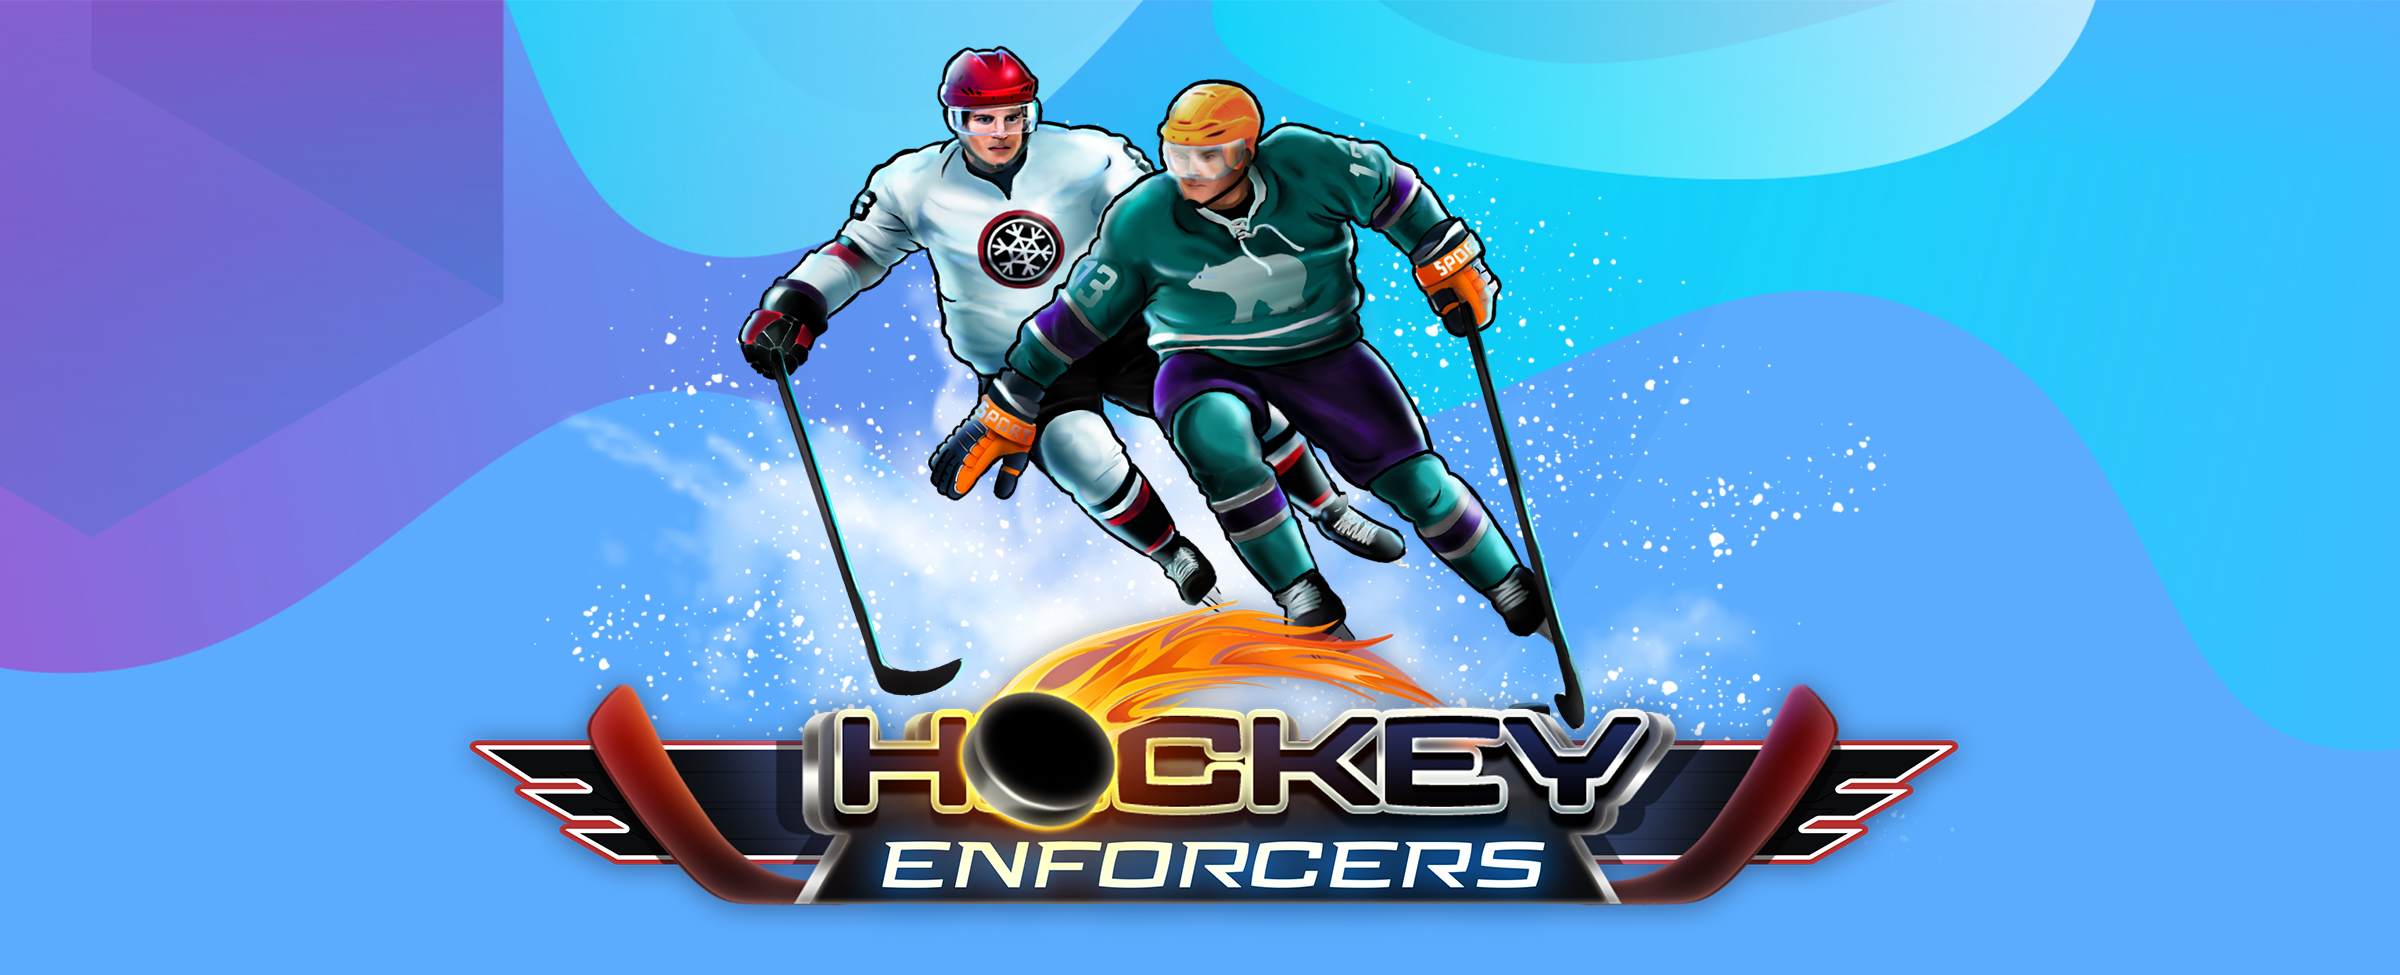 It's time to shift the action to the ice in this elite game of Hockey Enforcers. Pucker up!